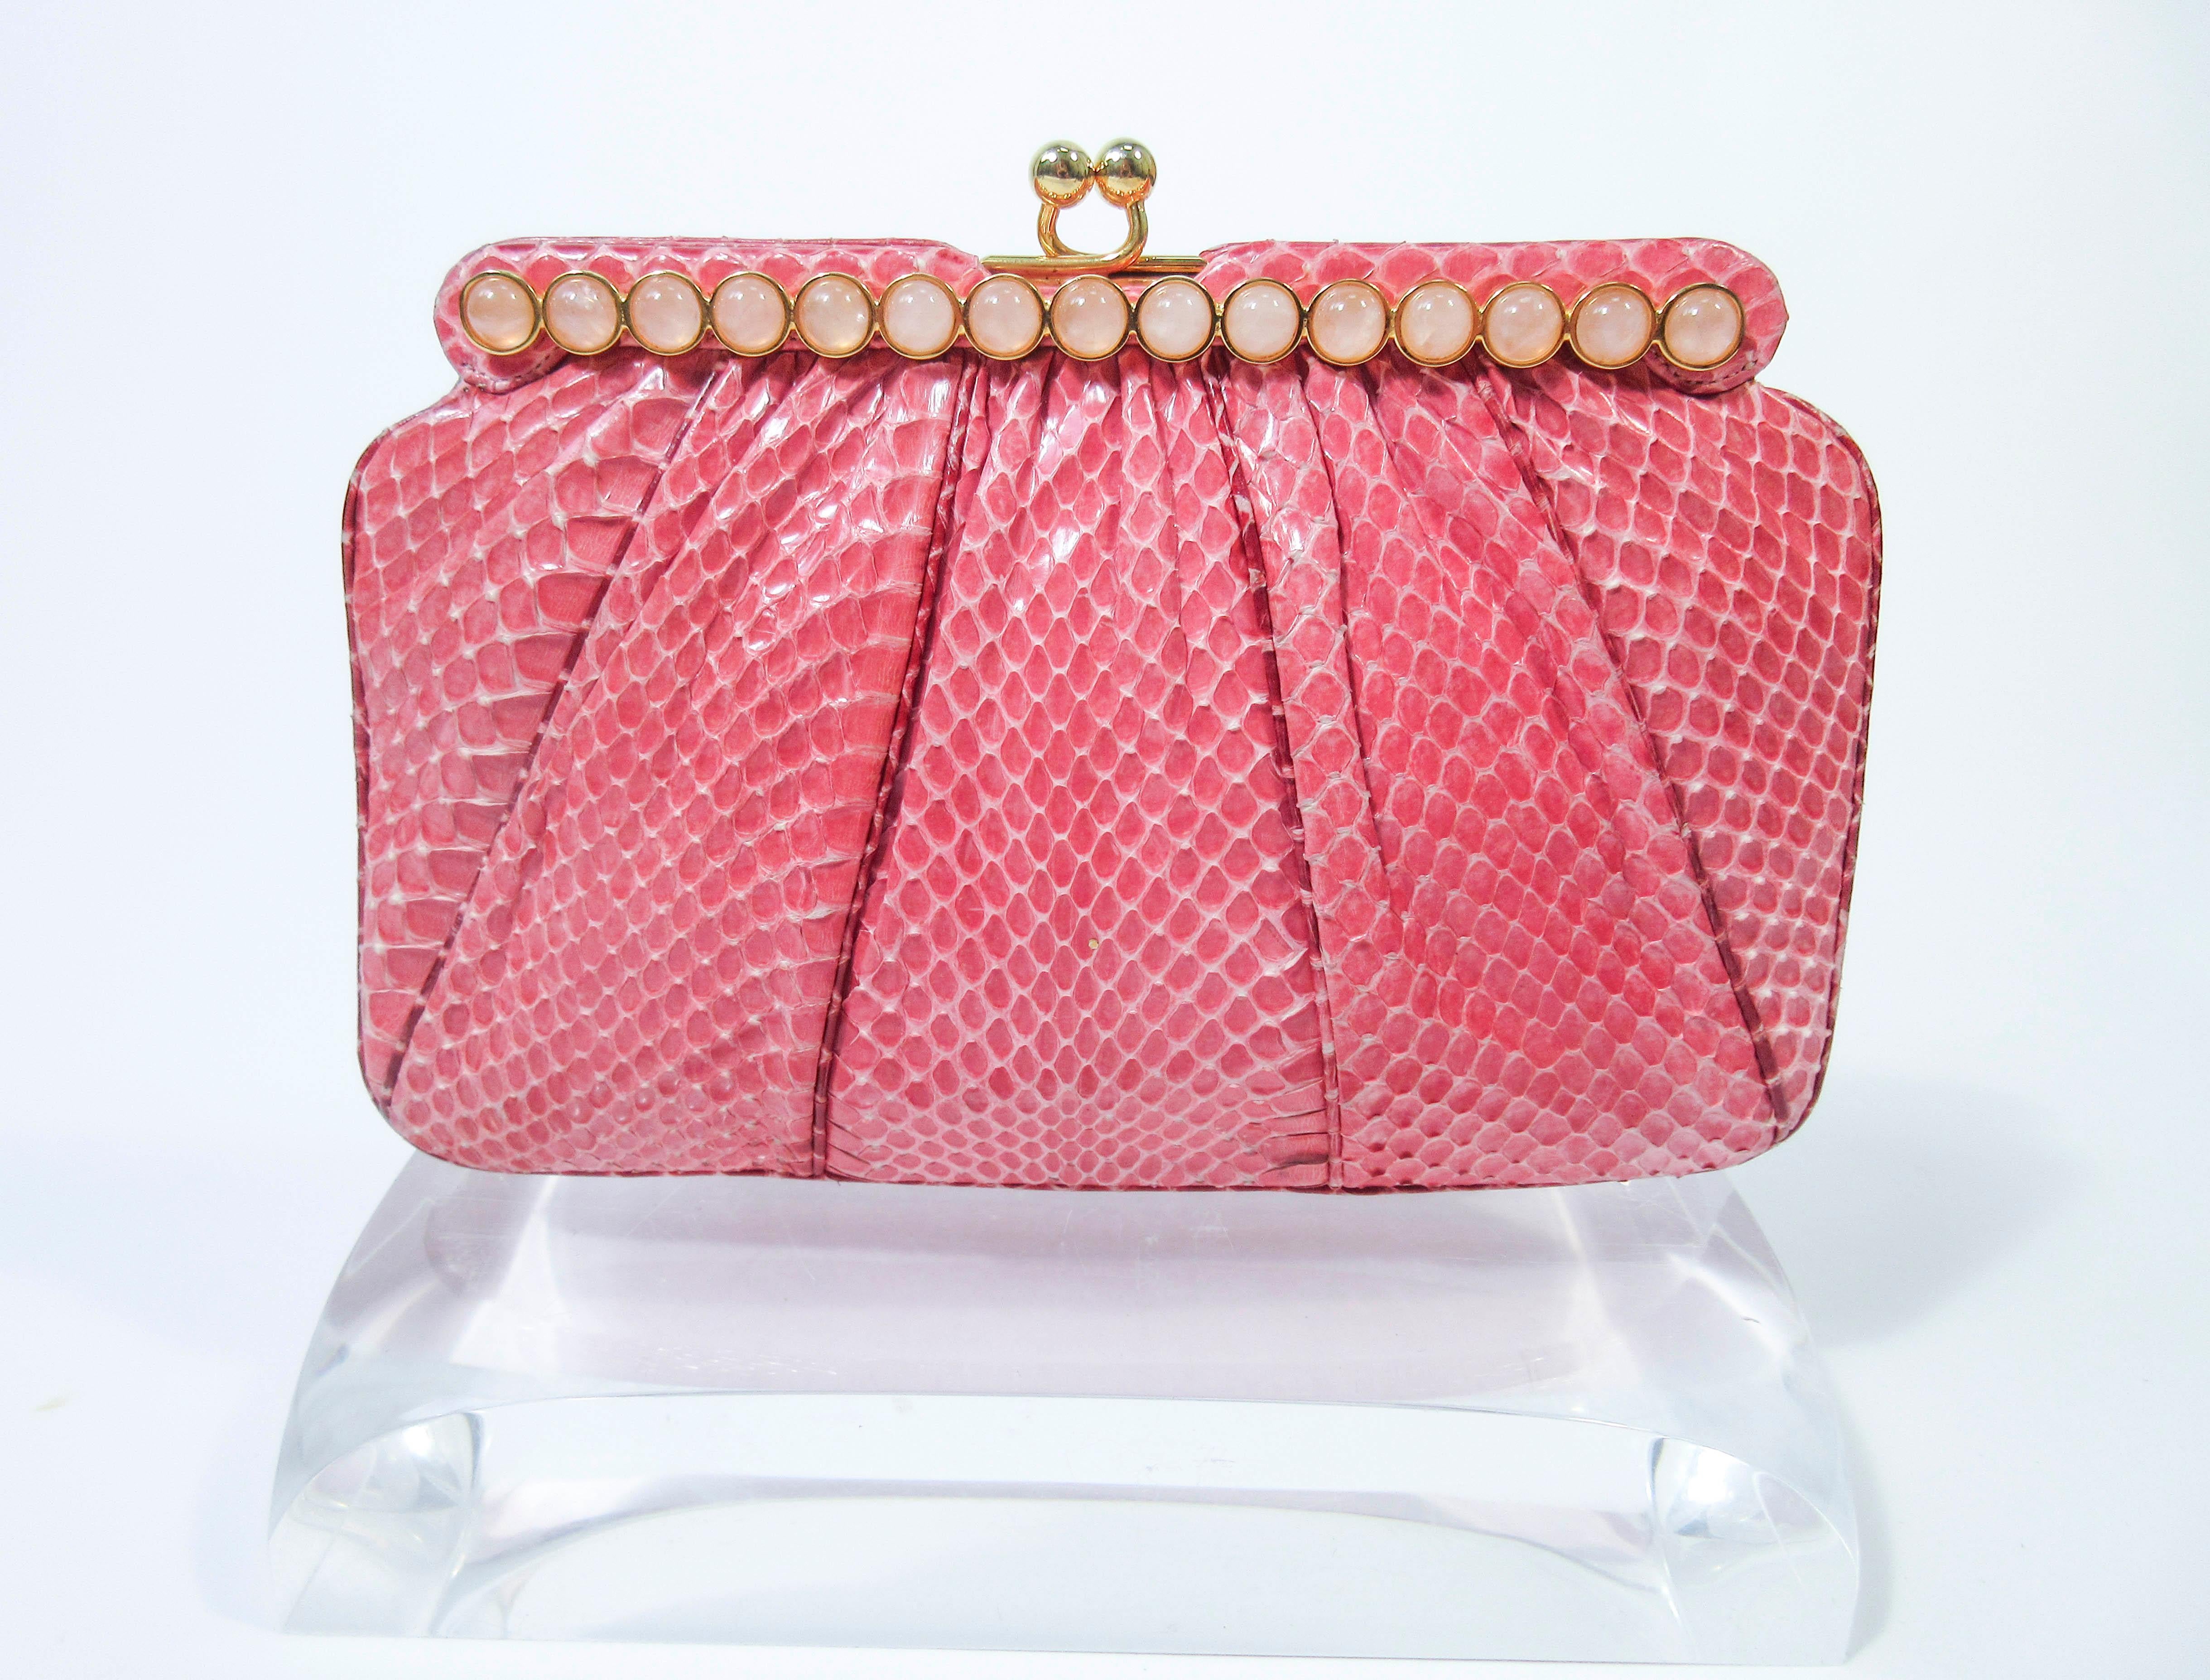 This Judith Leiber purse is composed of a pink snakeskin. Features a bar style frame with cabochon stone accents and gold hardware. There is an interior pocket and two slide pockets. In excellent 'like new' pre-owned condition (some signs of wear